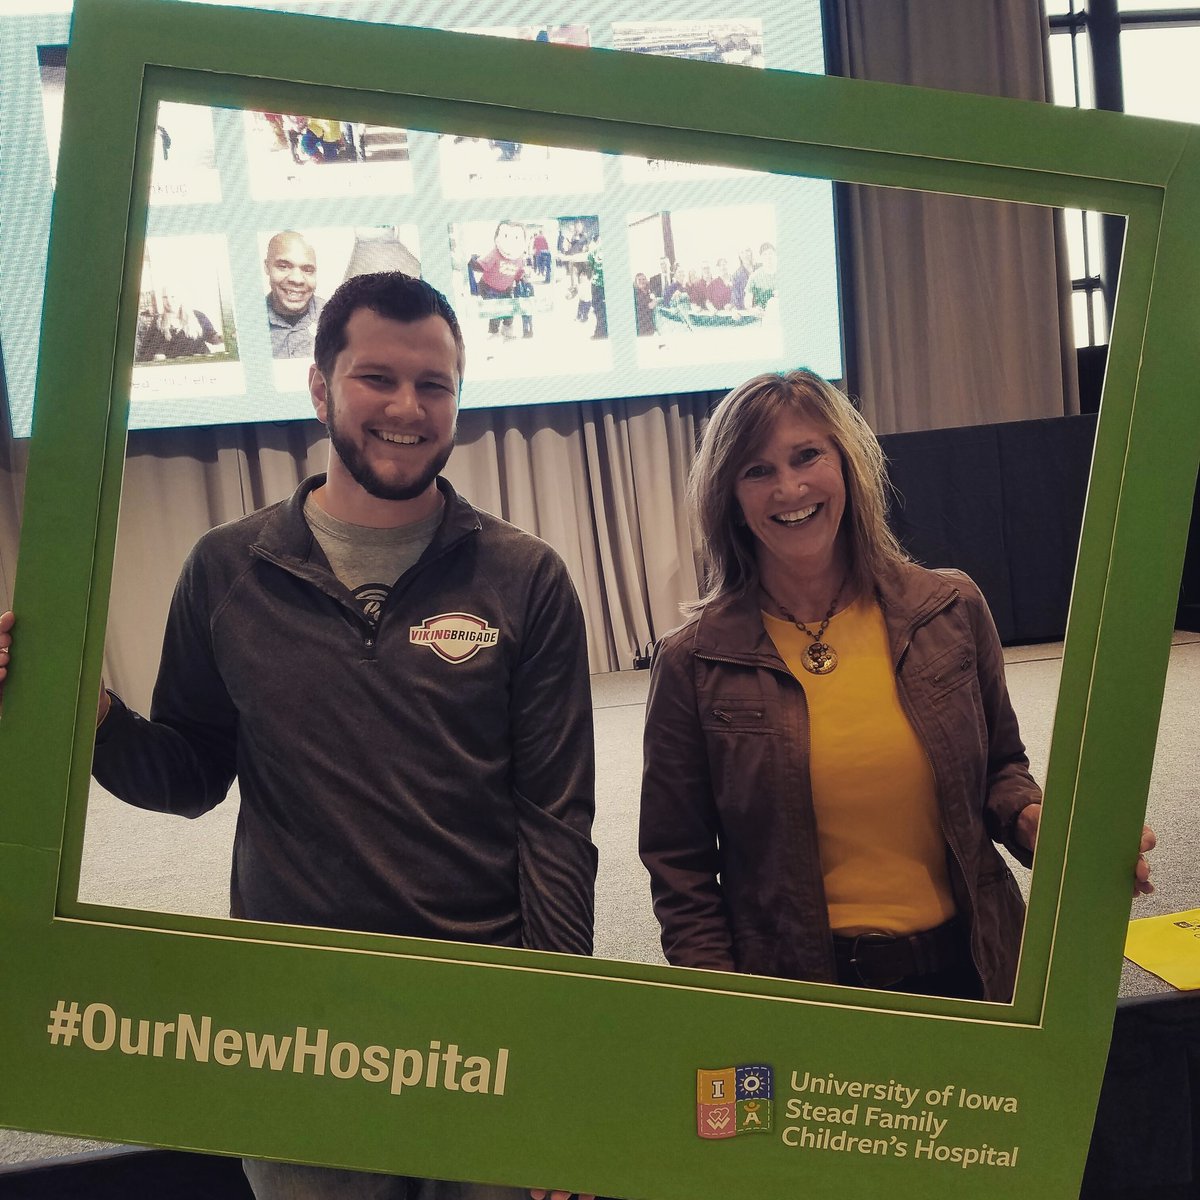 #OurNewHospital